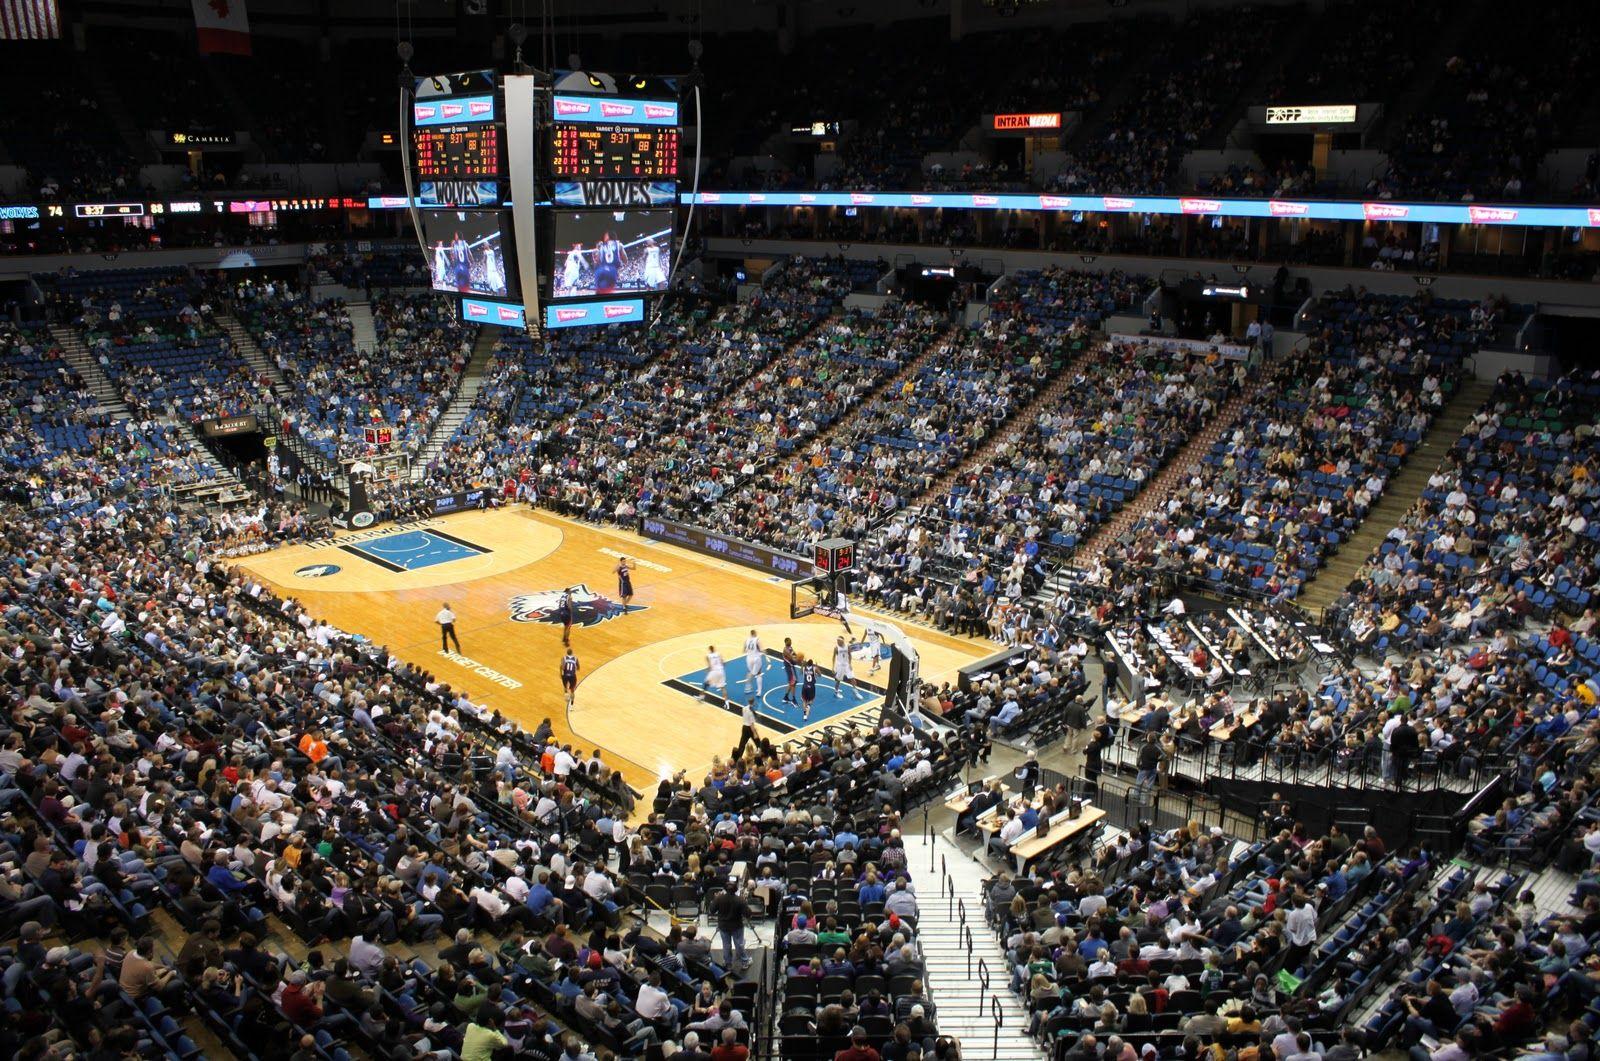 NBA Finals: TBD at Minnesota Timberwolves (Home Game 4) (Date TBD) (If Necessary)